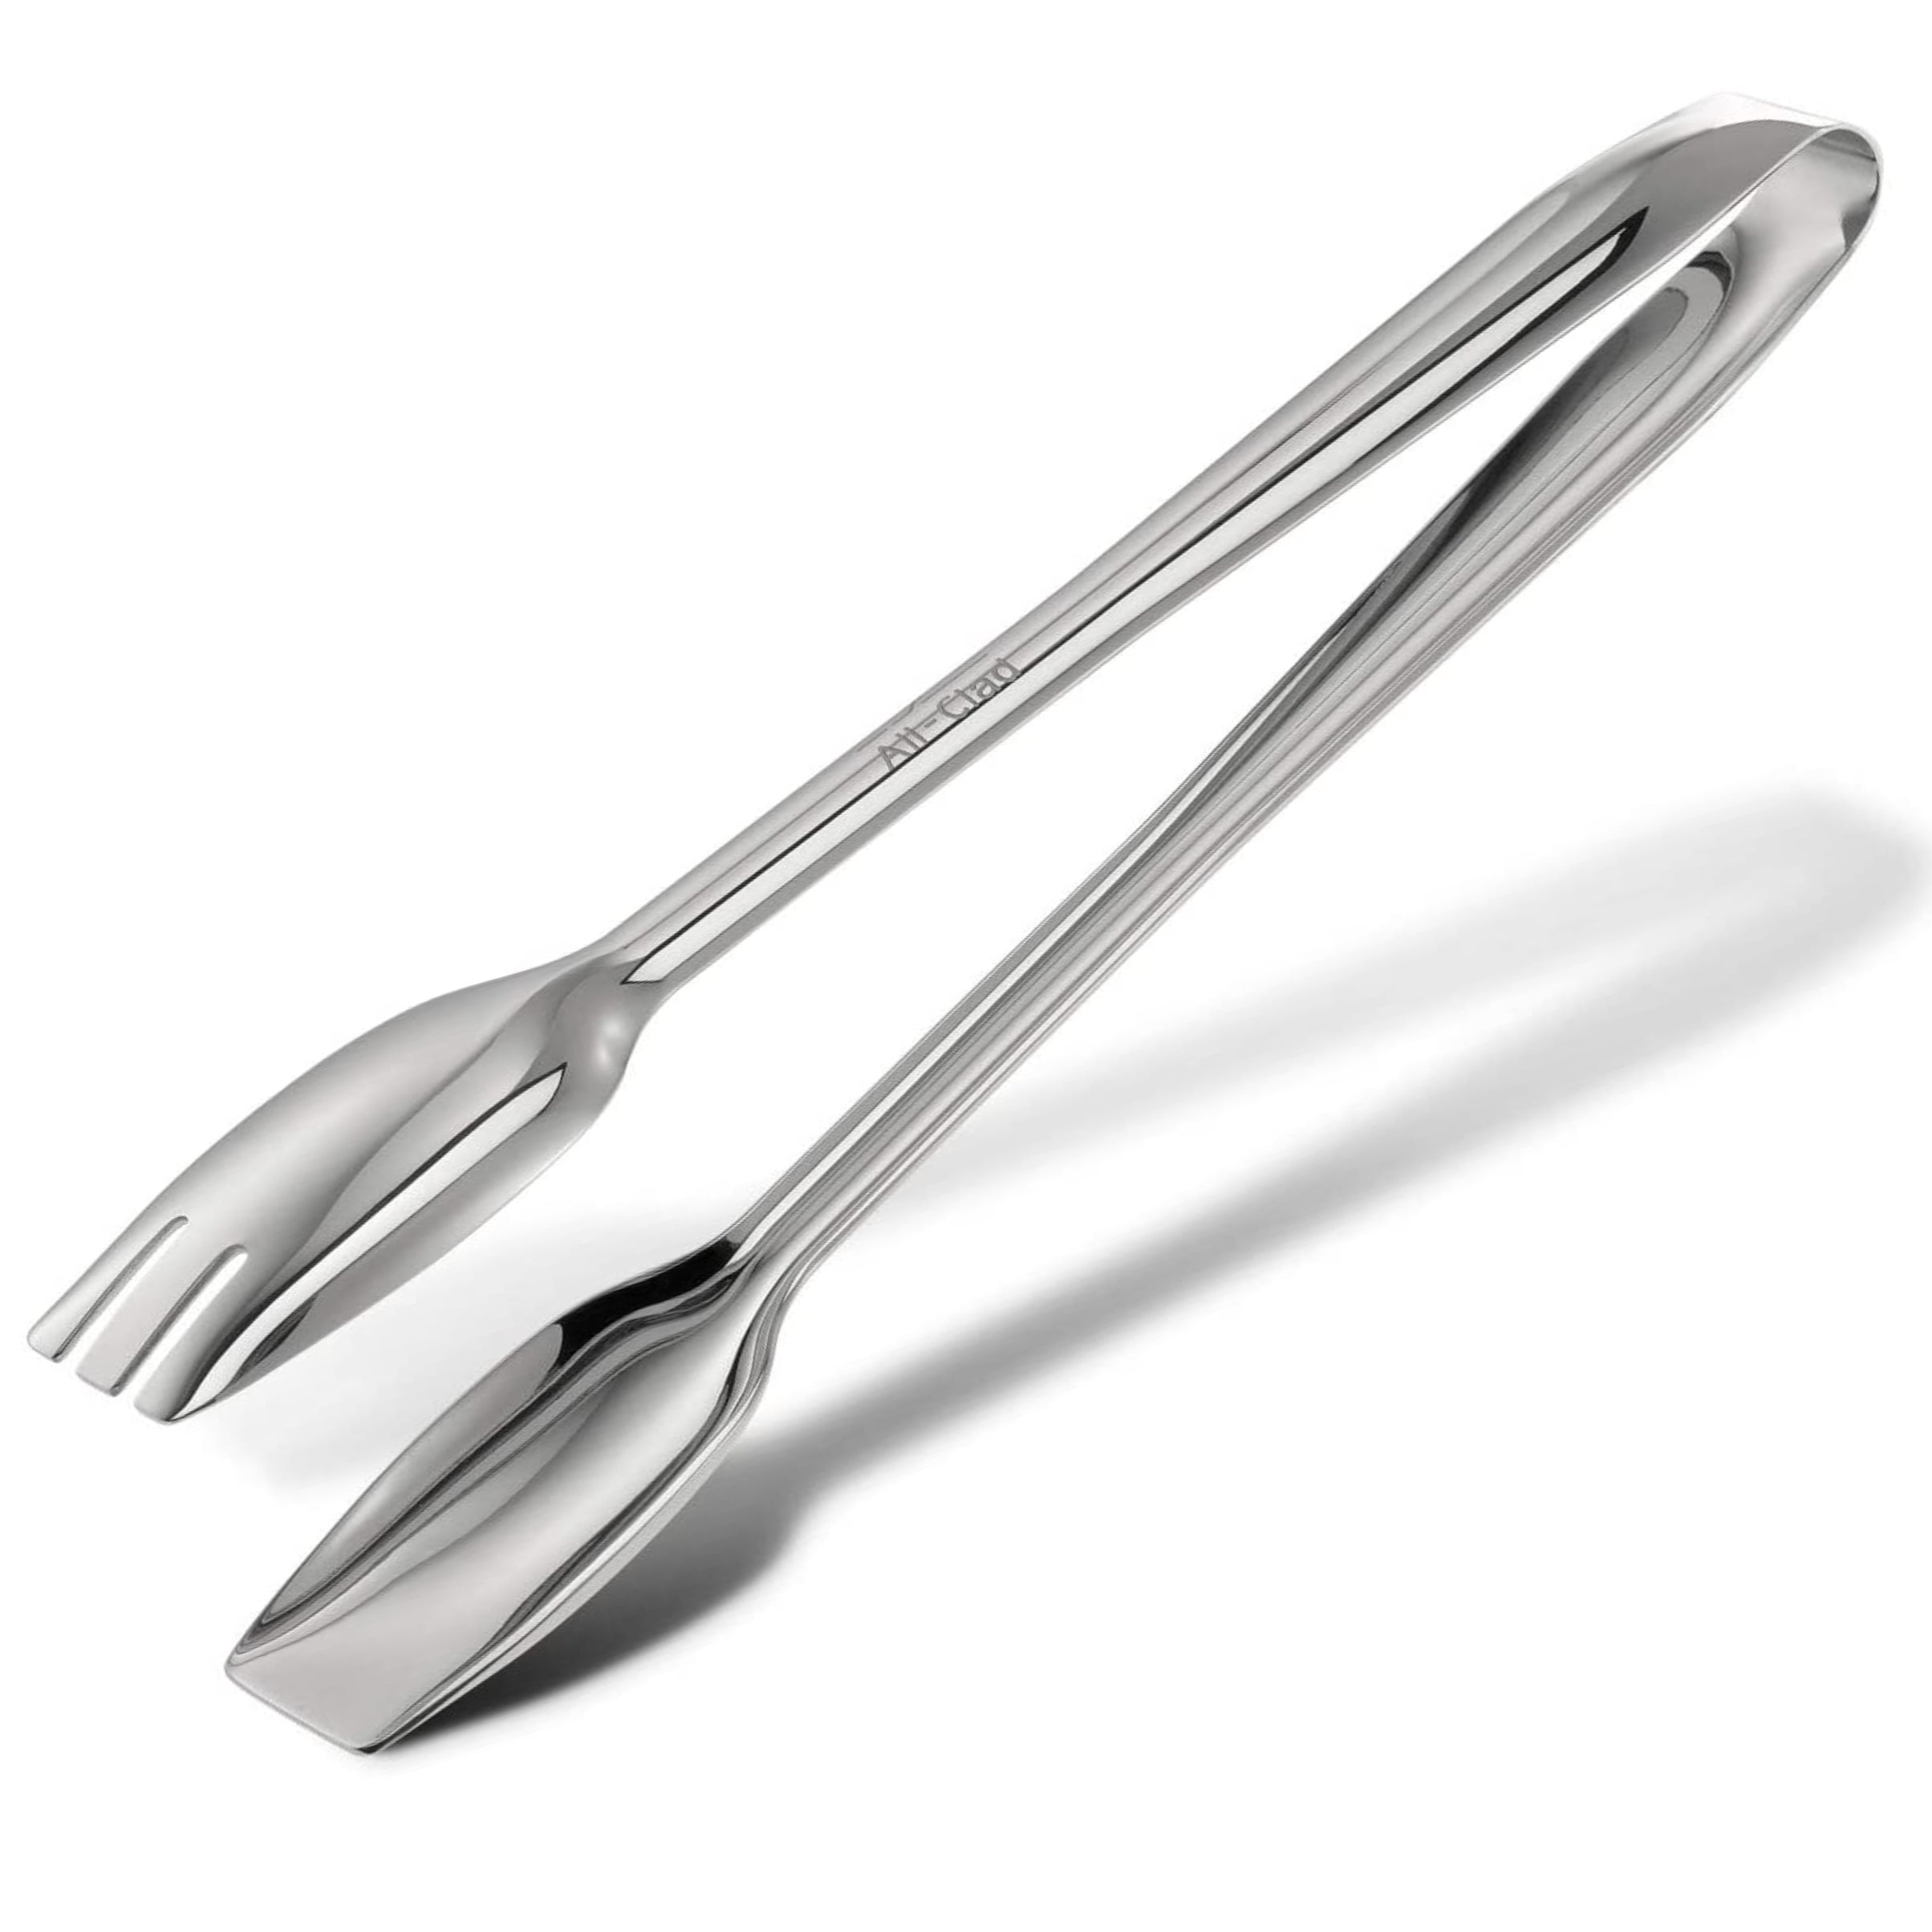 All-Clad Cook Serve 18/10 Stainless Steel Slotted Tongs, 9.5 inch